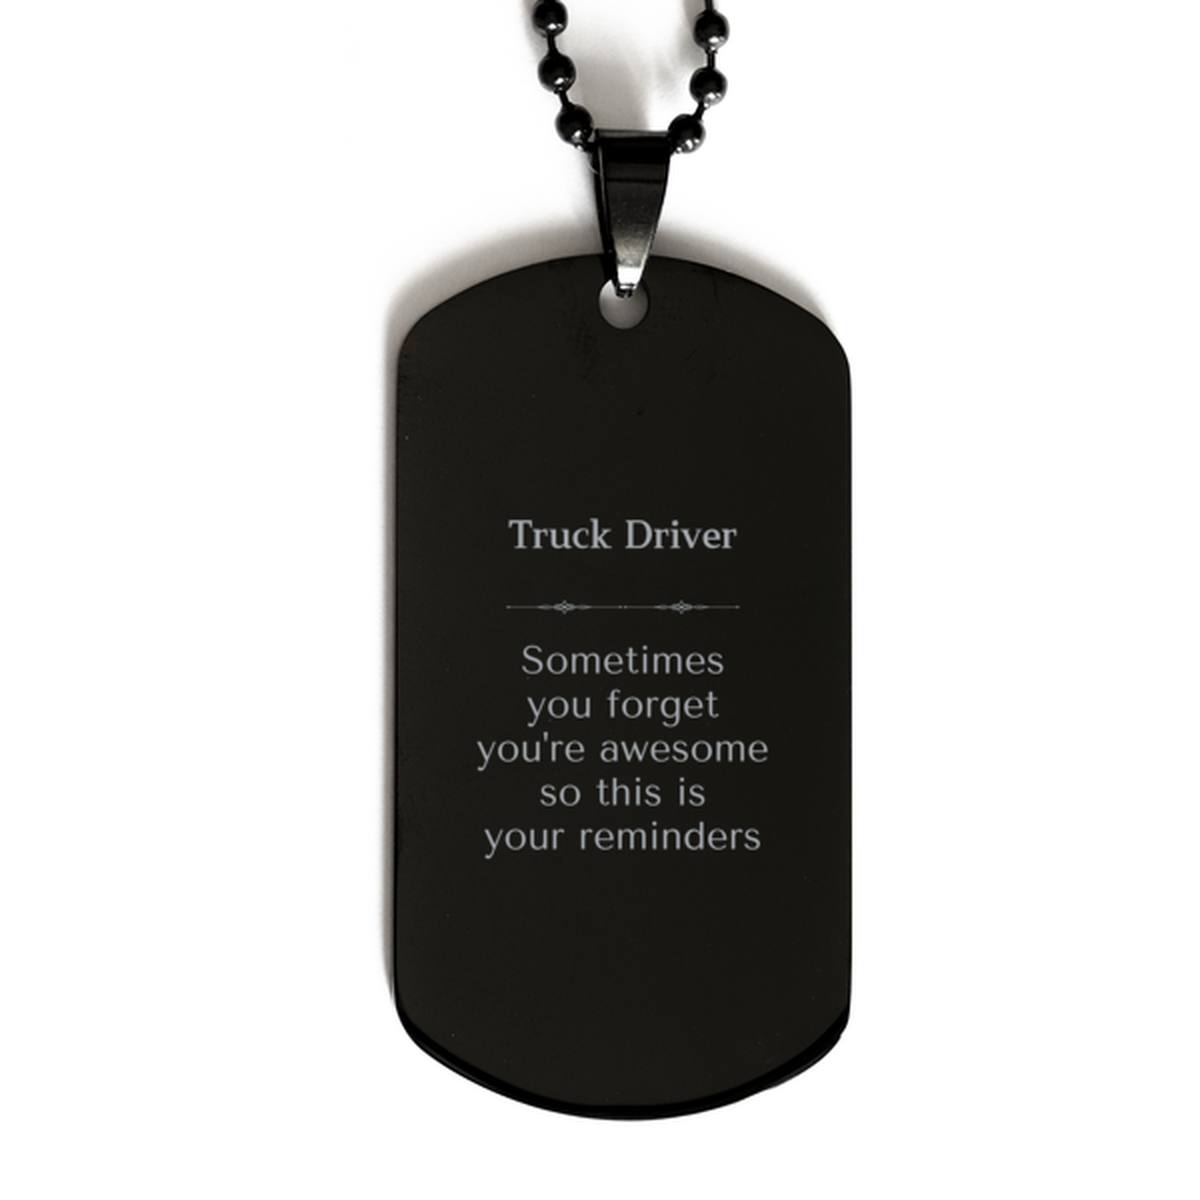 Sentimental Truck Driver Black Dog Tag, Truck Driver Sometimes you forget you're awesome so this is your reminders, Graduation Christmas Birthday Gifts for Truck Driver, Men, Women, Coworkers